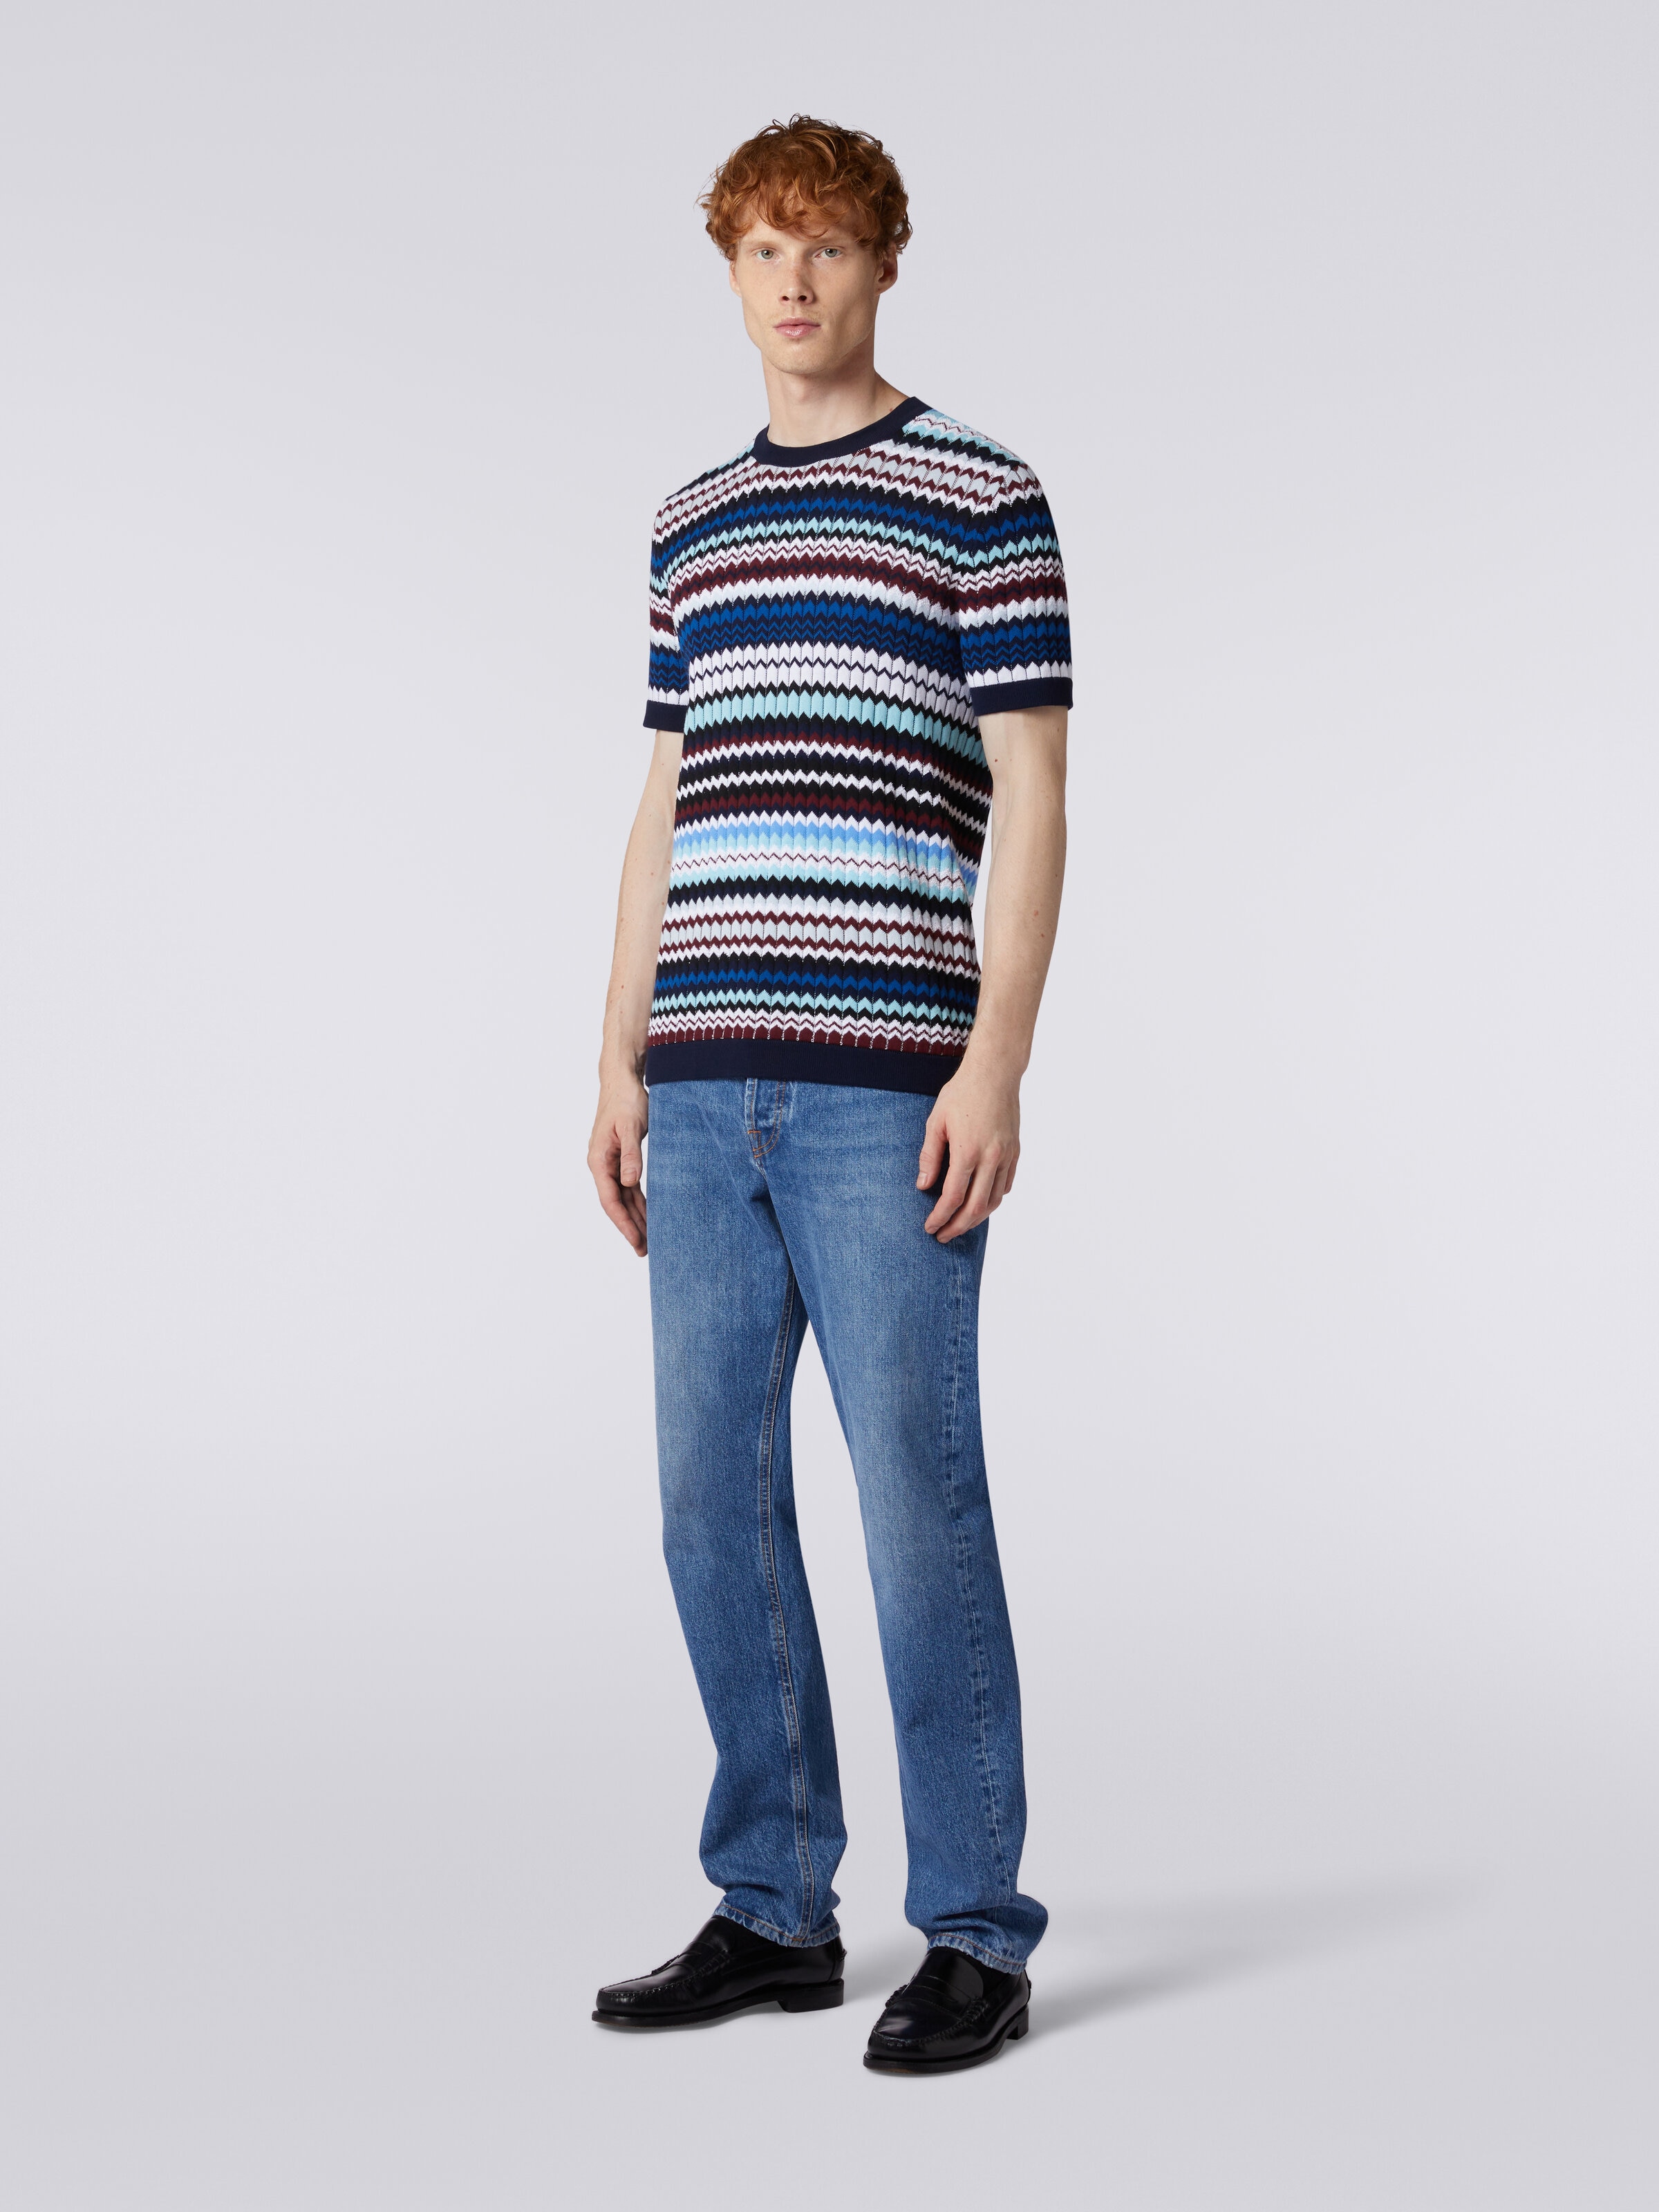 T-shirt in ribbed zigzag cotton knit, Multicoloured  - 2